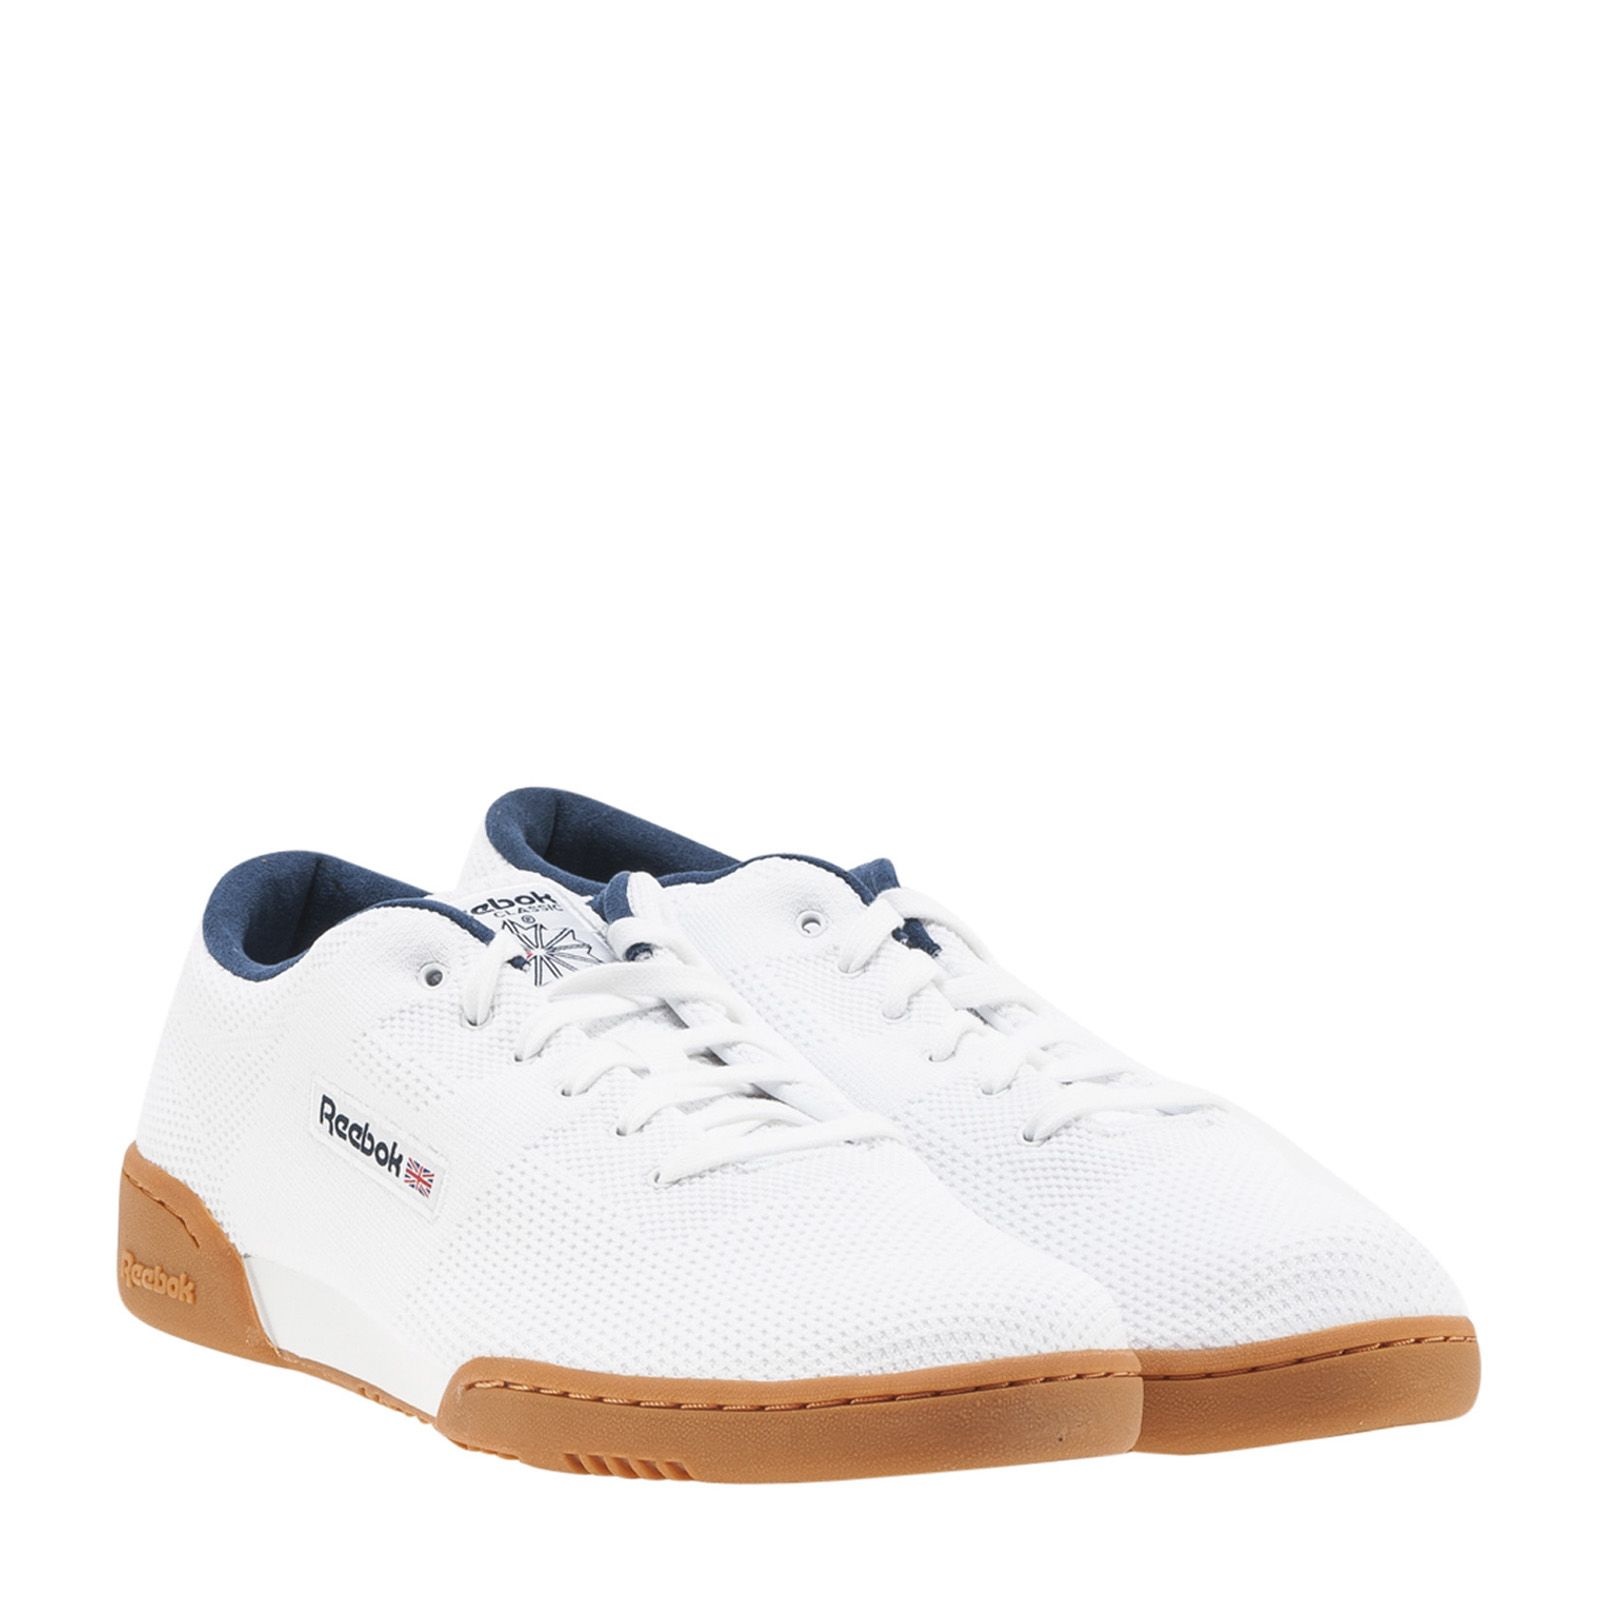 REEBOK Workout Clean Og Knit Sneakers in White | ModeSens